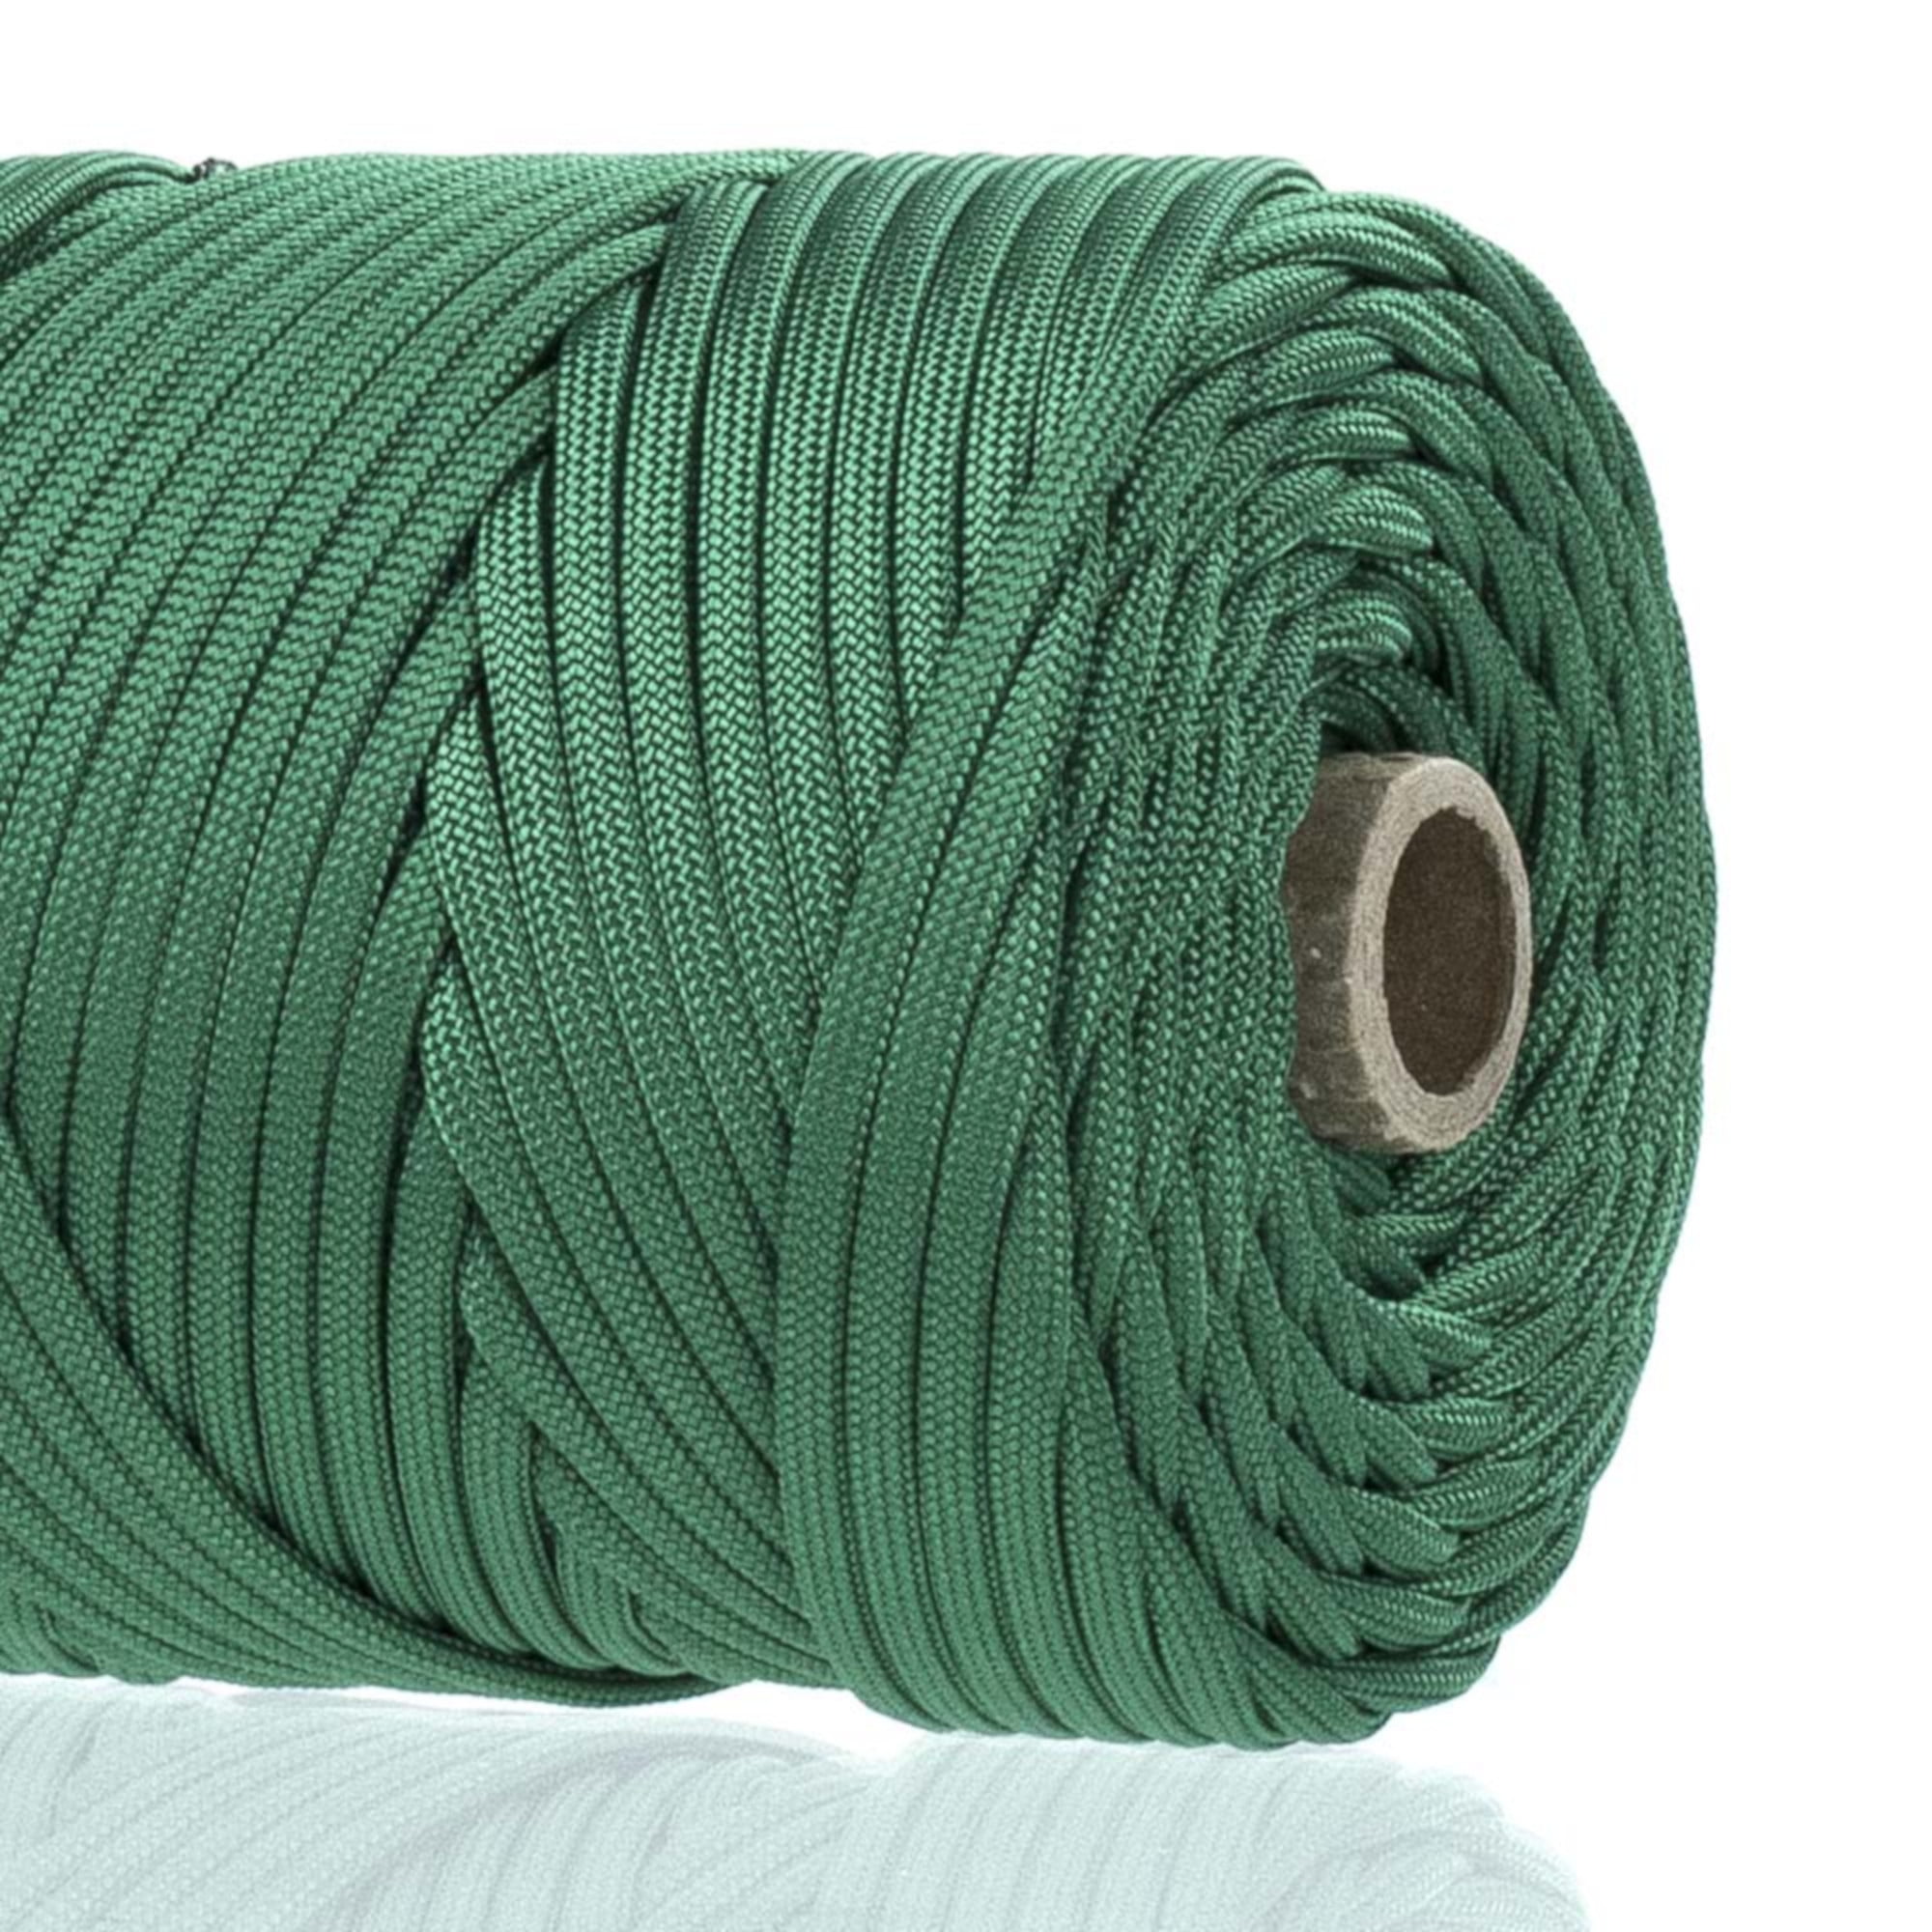 Mil-Spec Commercial Grade 550 50,100 Foot Type III 7 Strand Paracord/Parachute Cord 